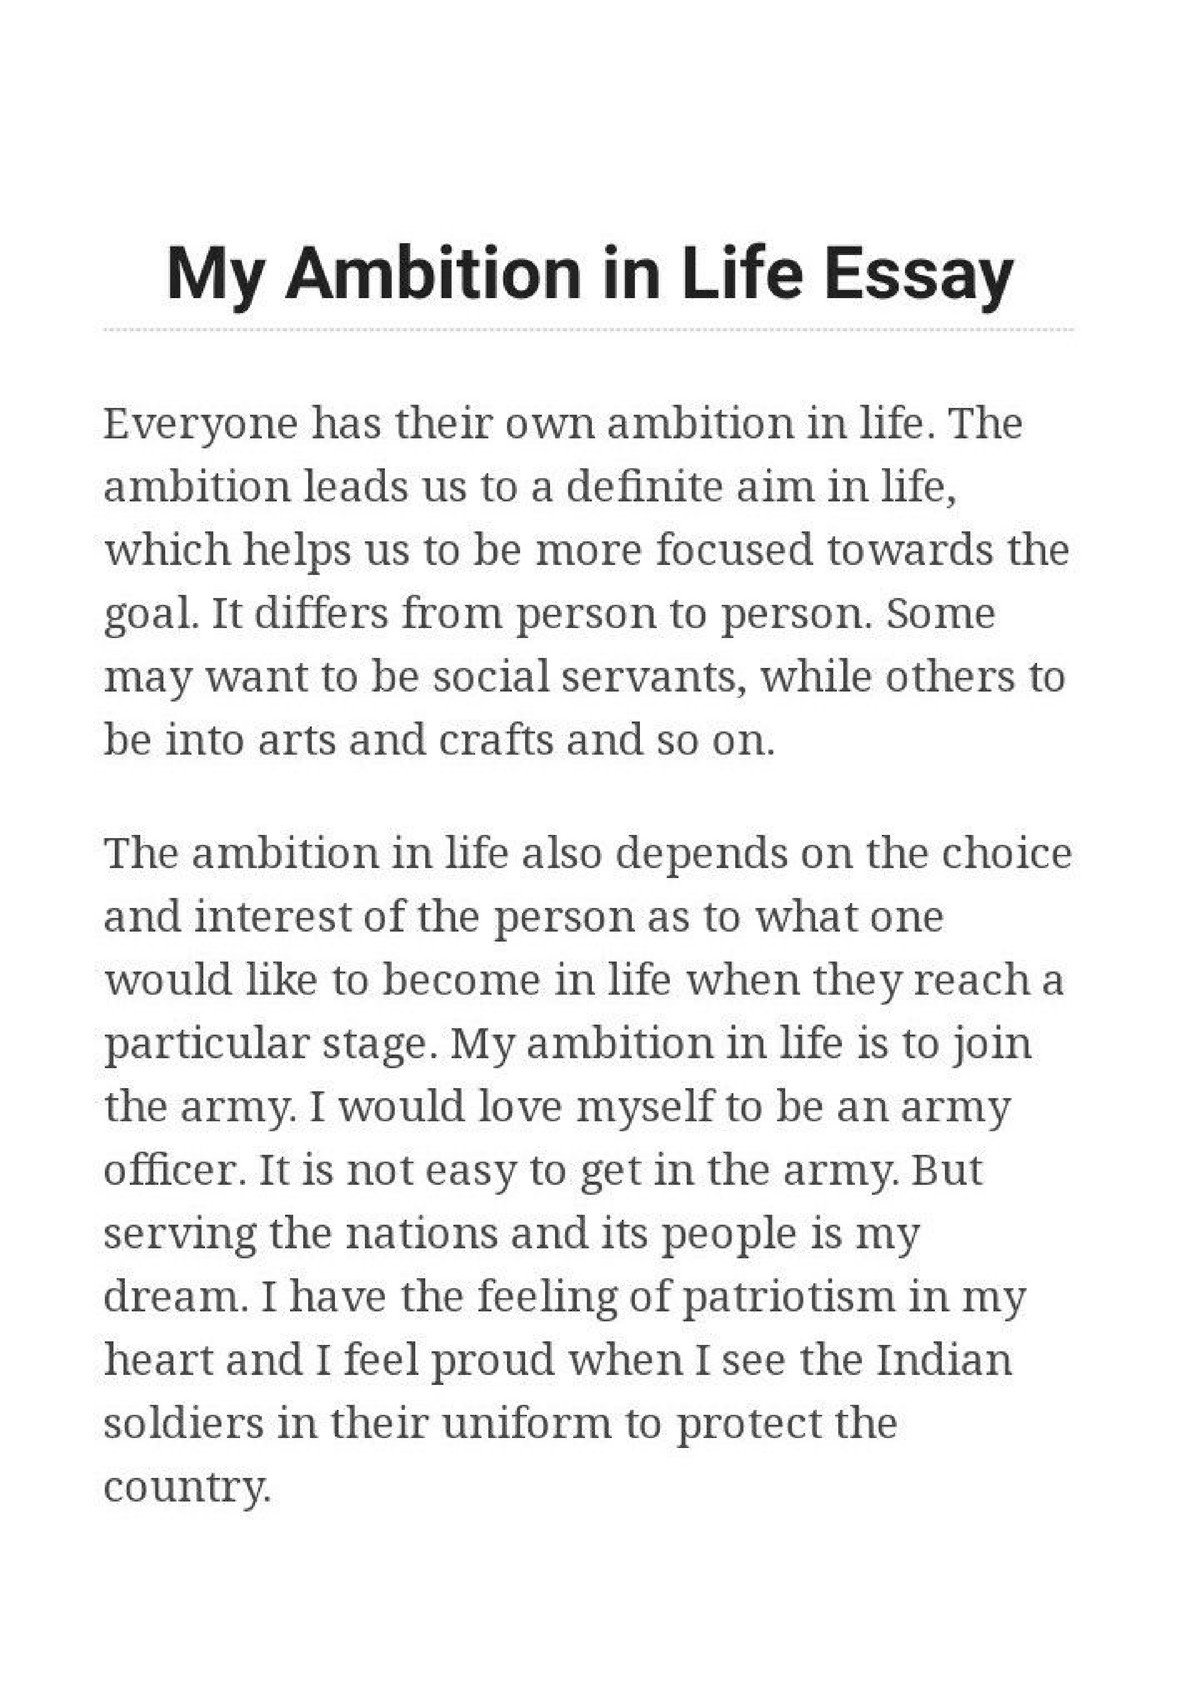 my ambition in life essay pdf